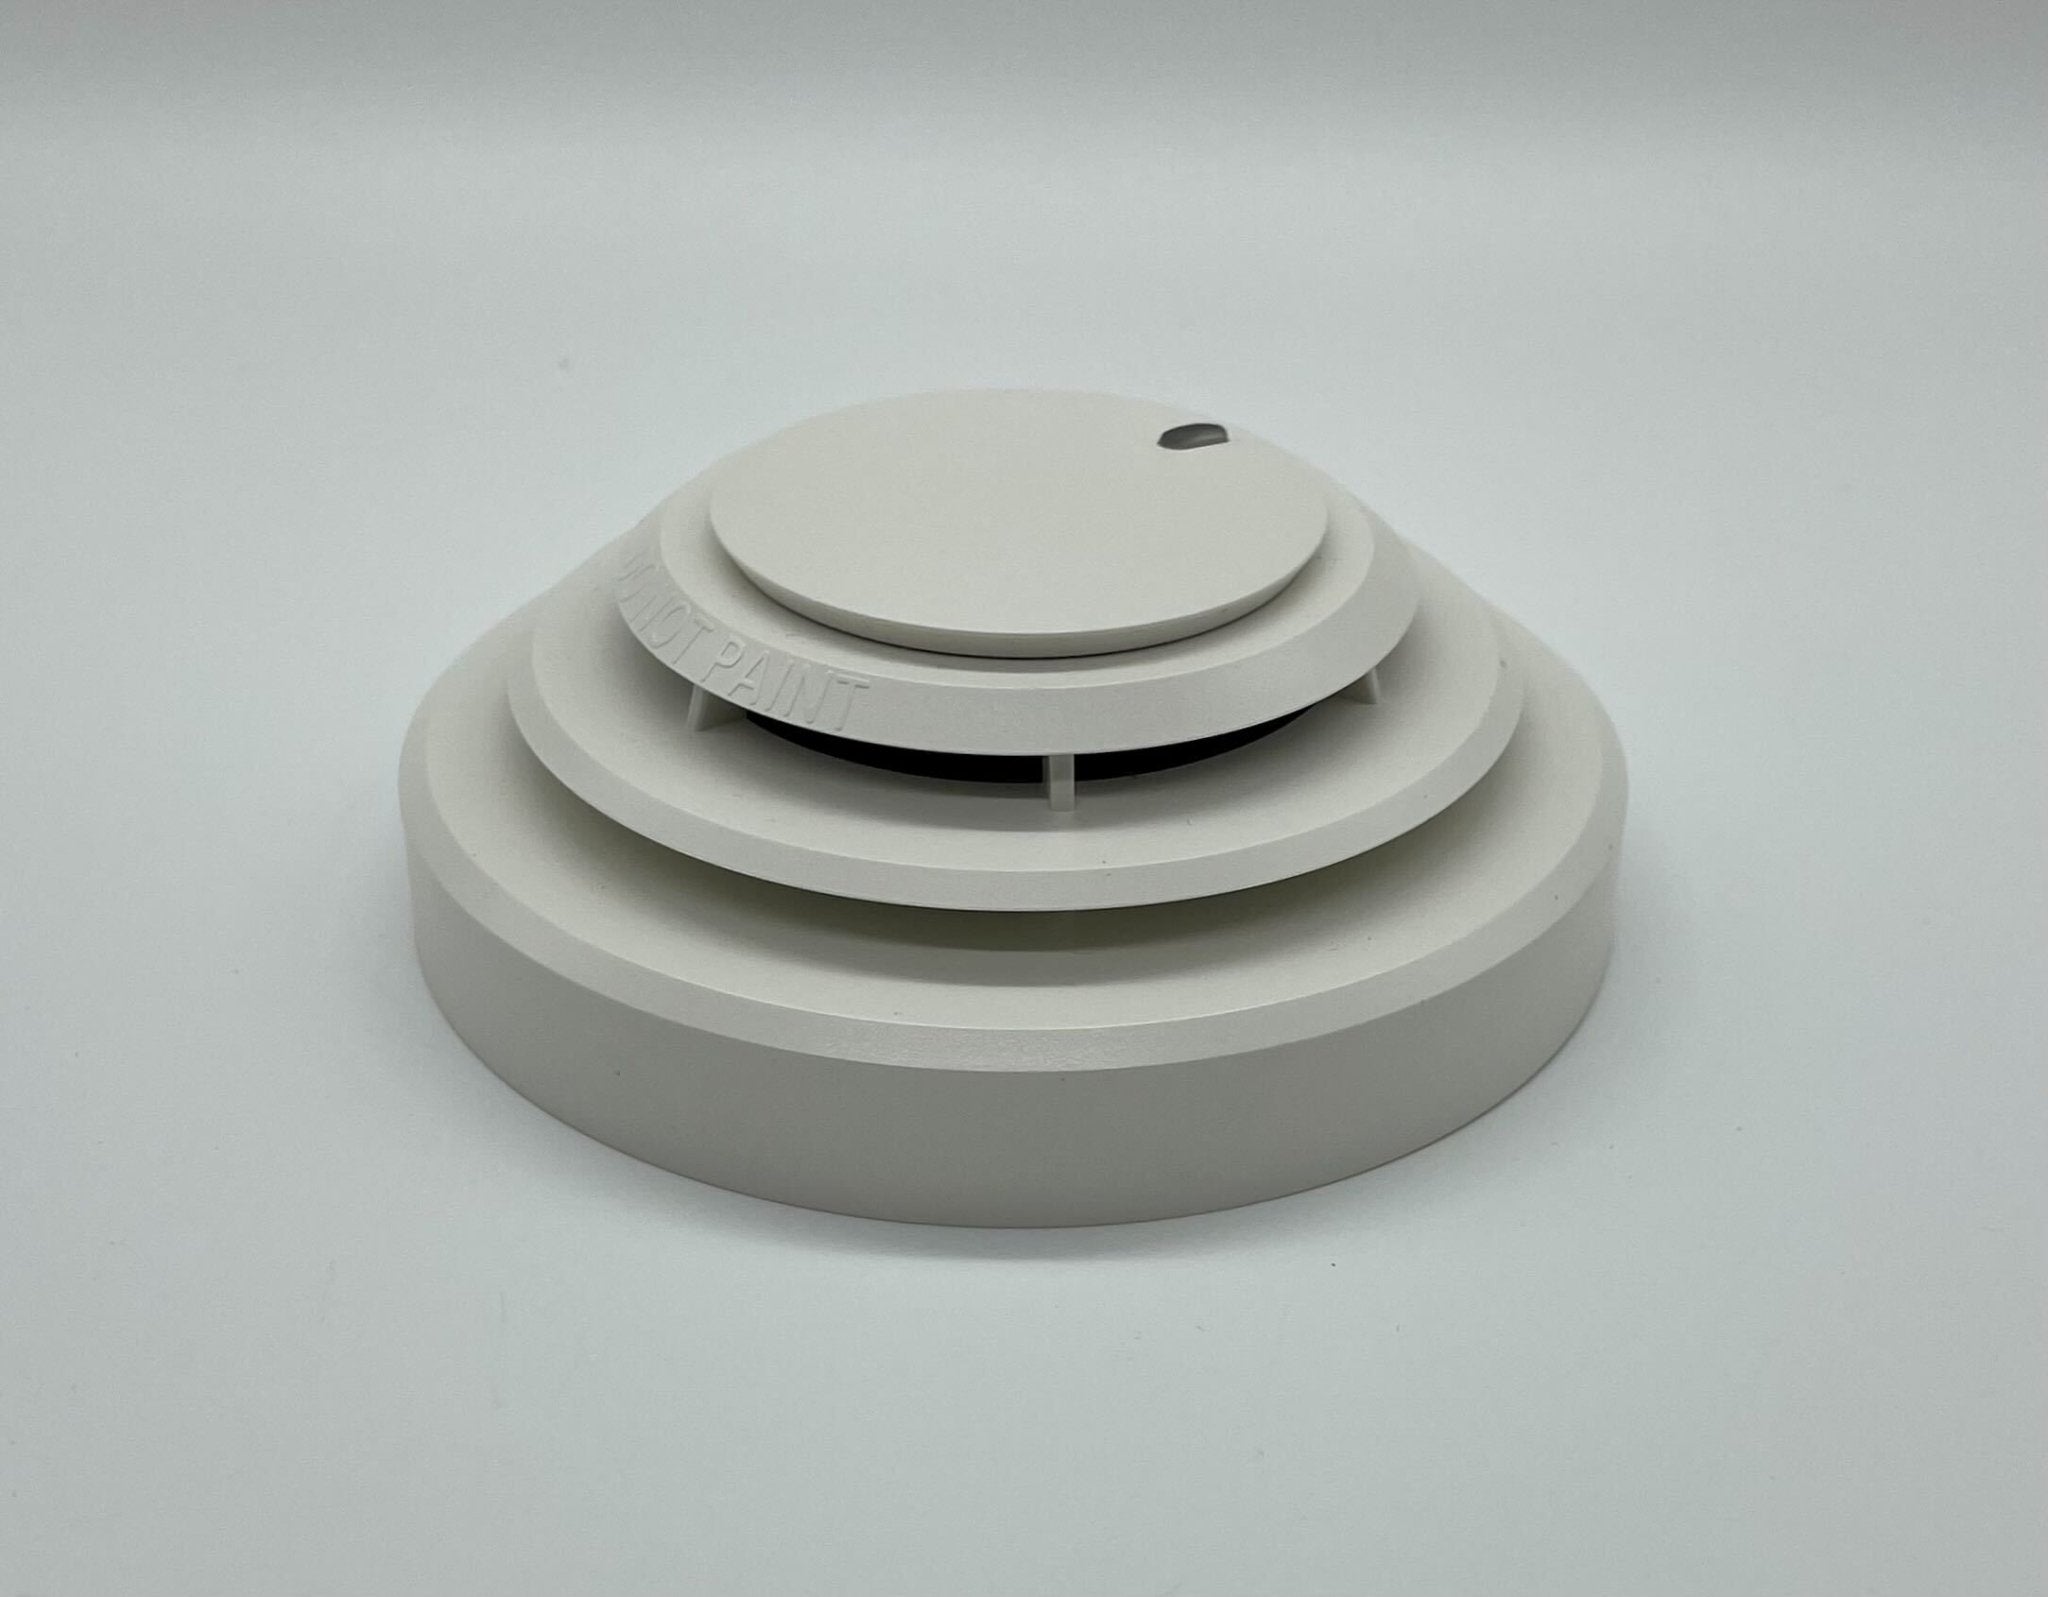 Potter PAD300-PD Photoelectric Smoke Detector - The Fire Alarm Supplier